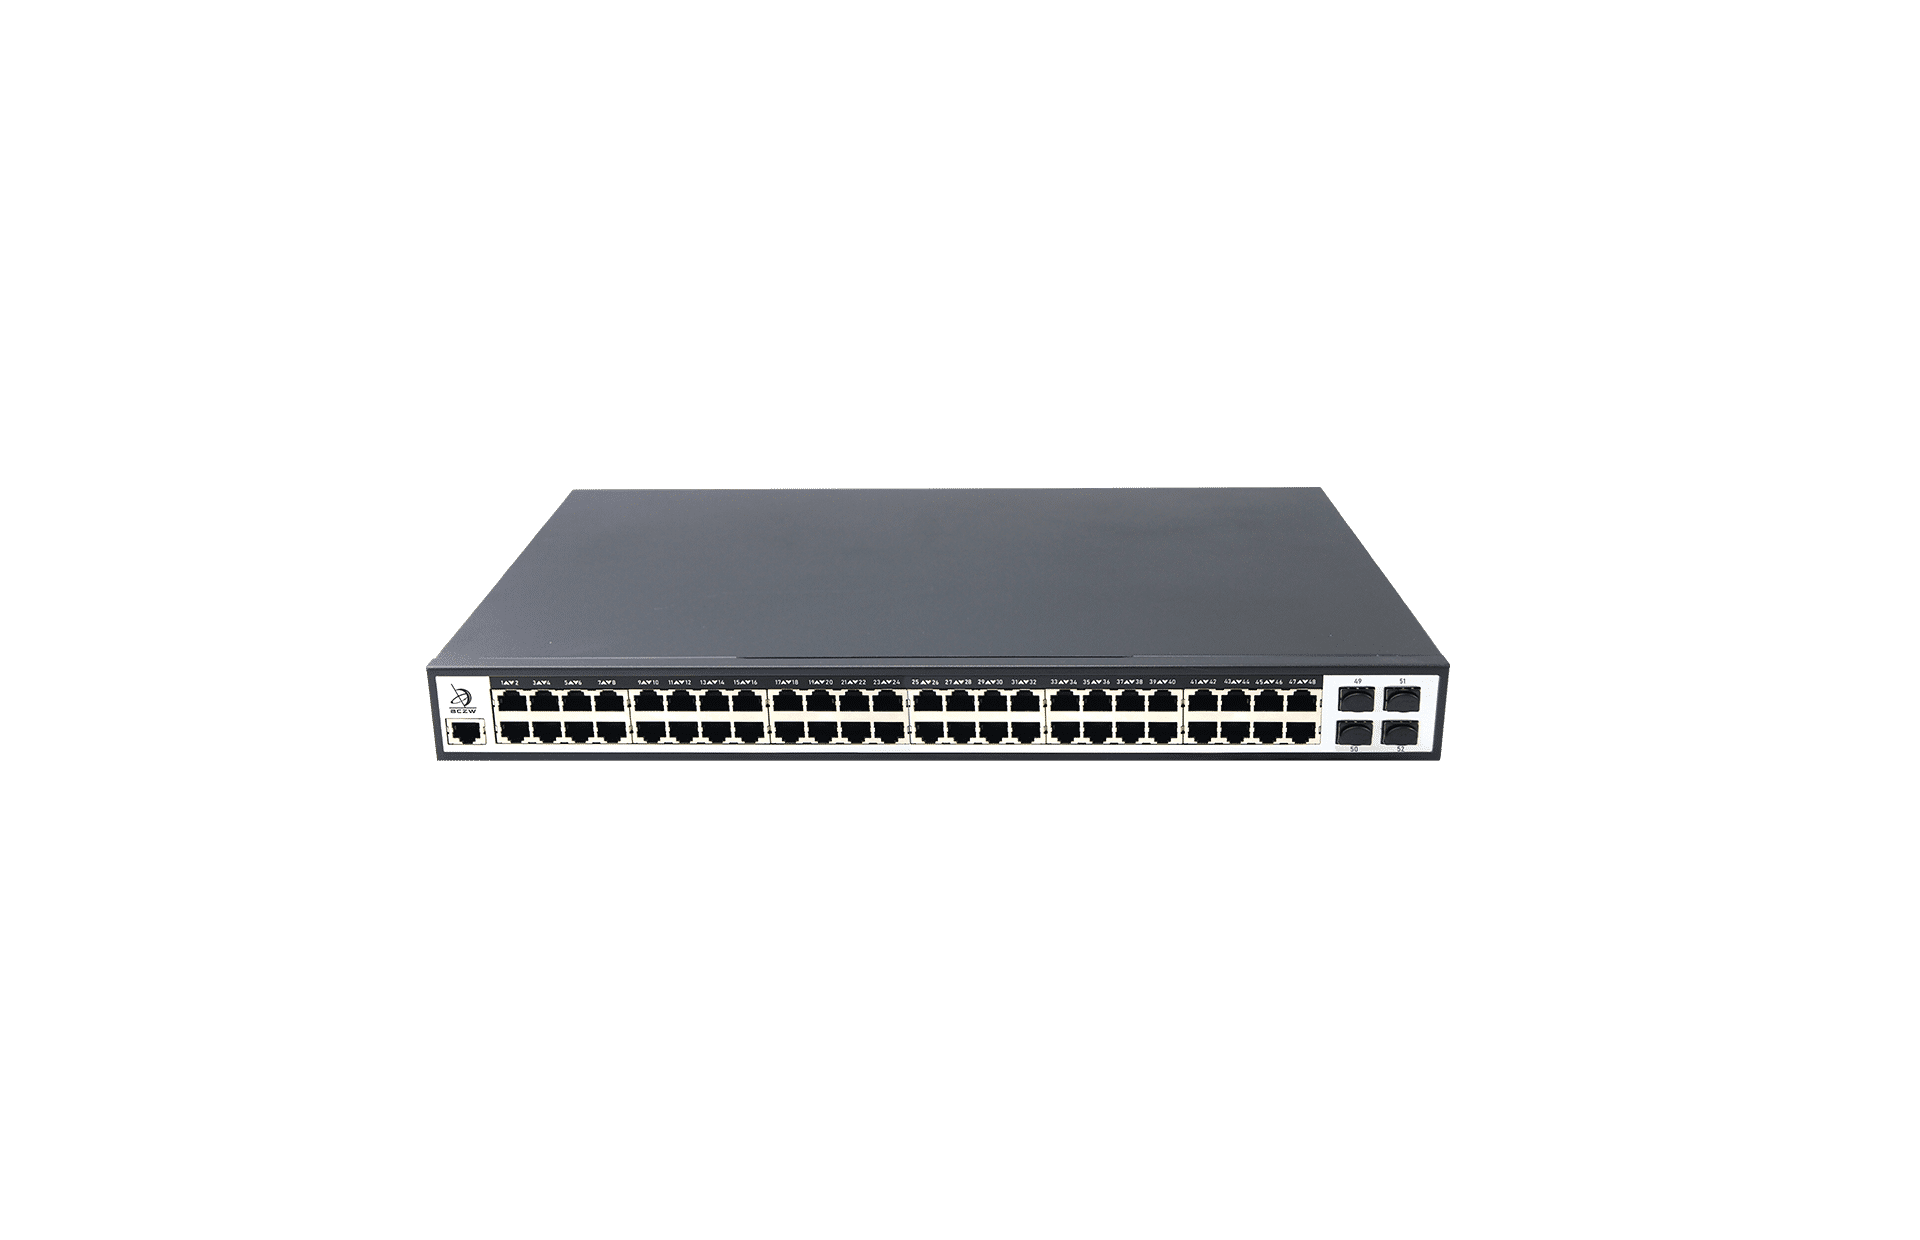 48 Ports 10/100/1000Mbps Managed PoE Switch with 4 Ports 10G SFP+